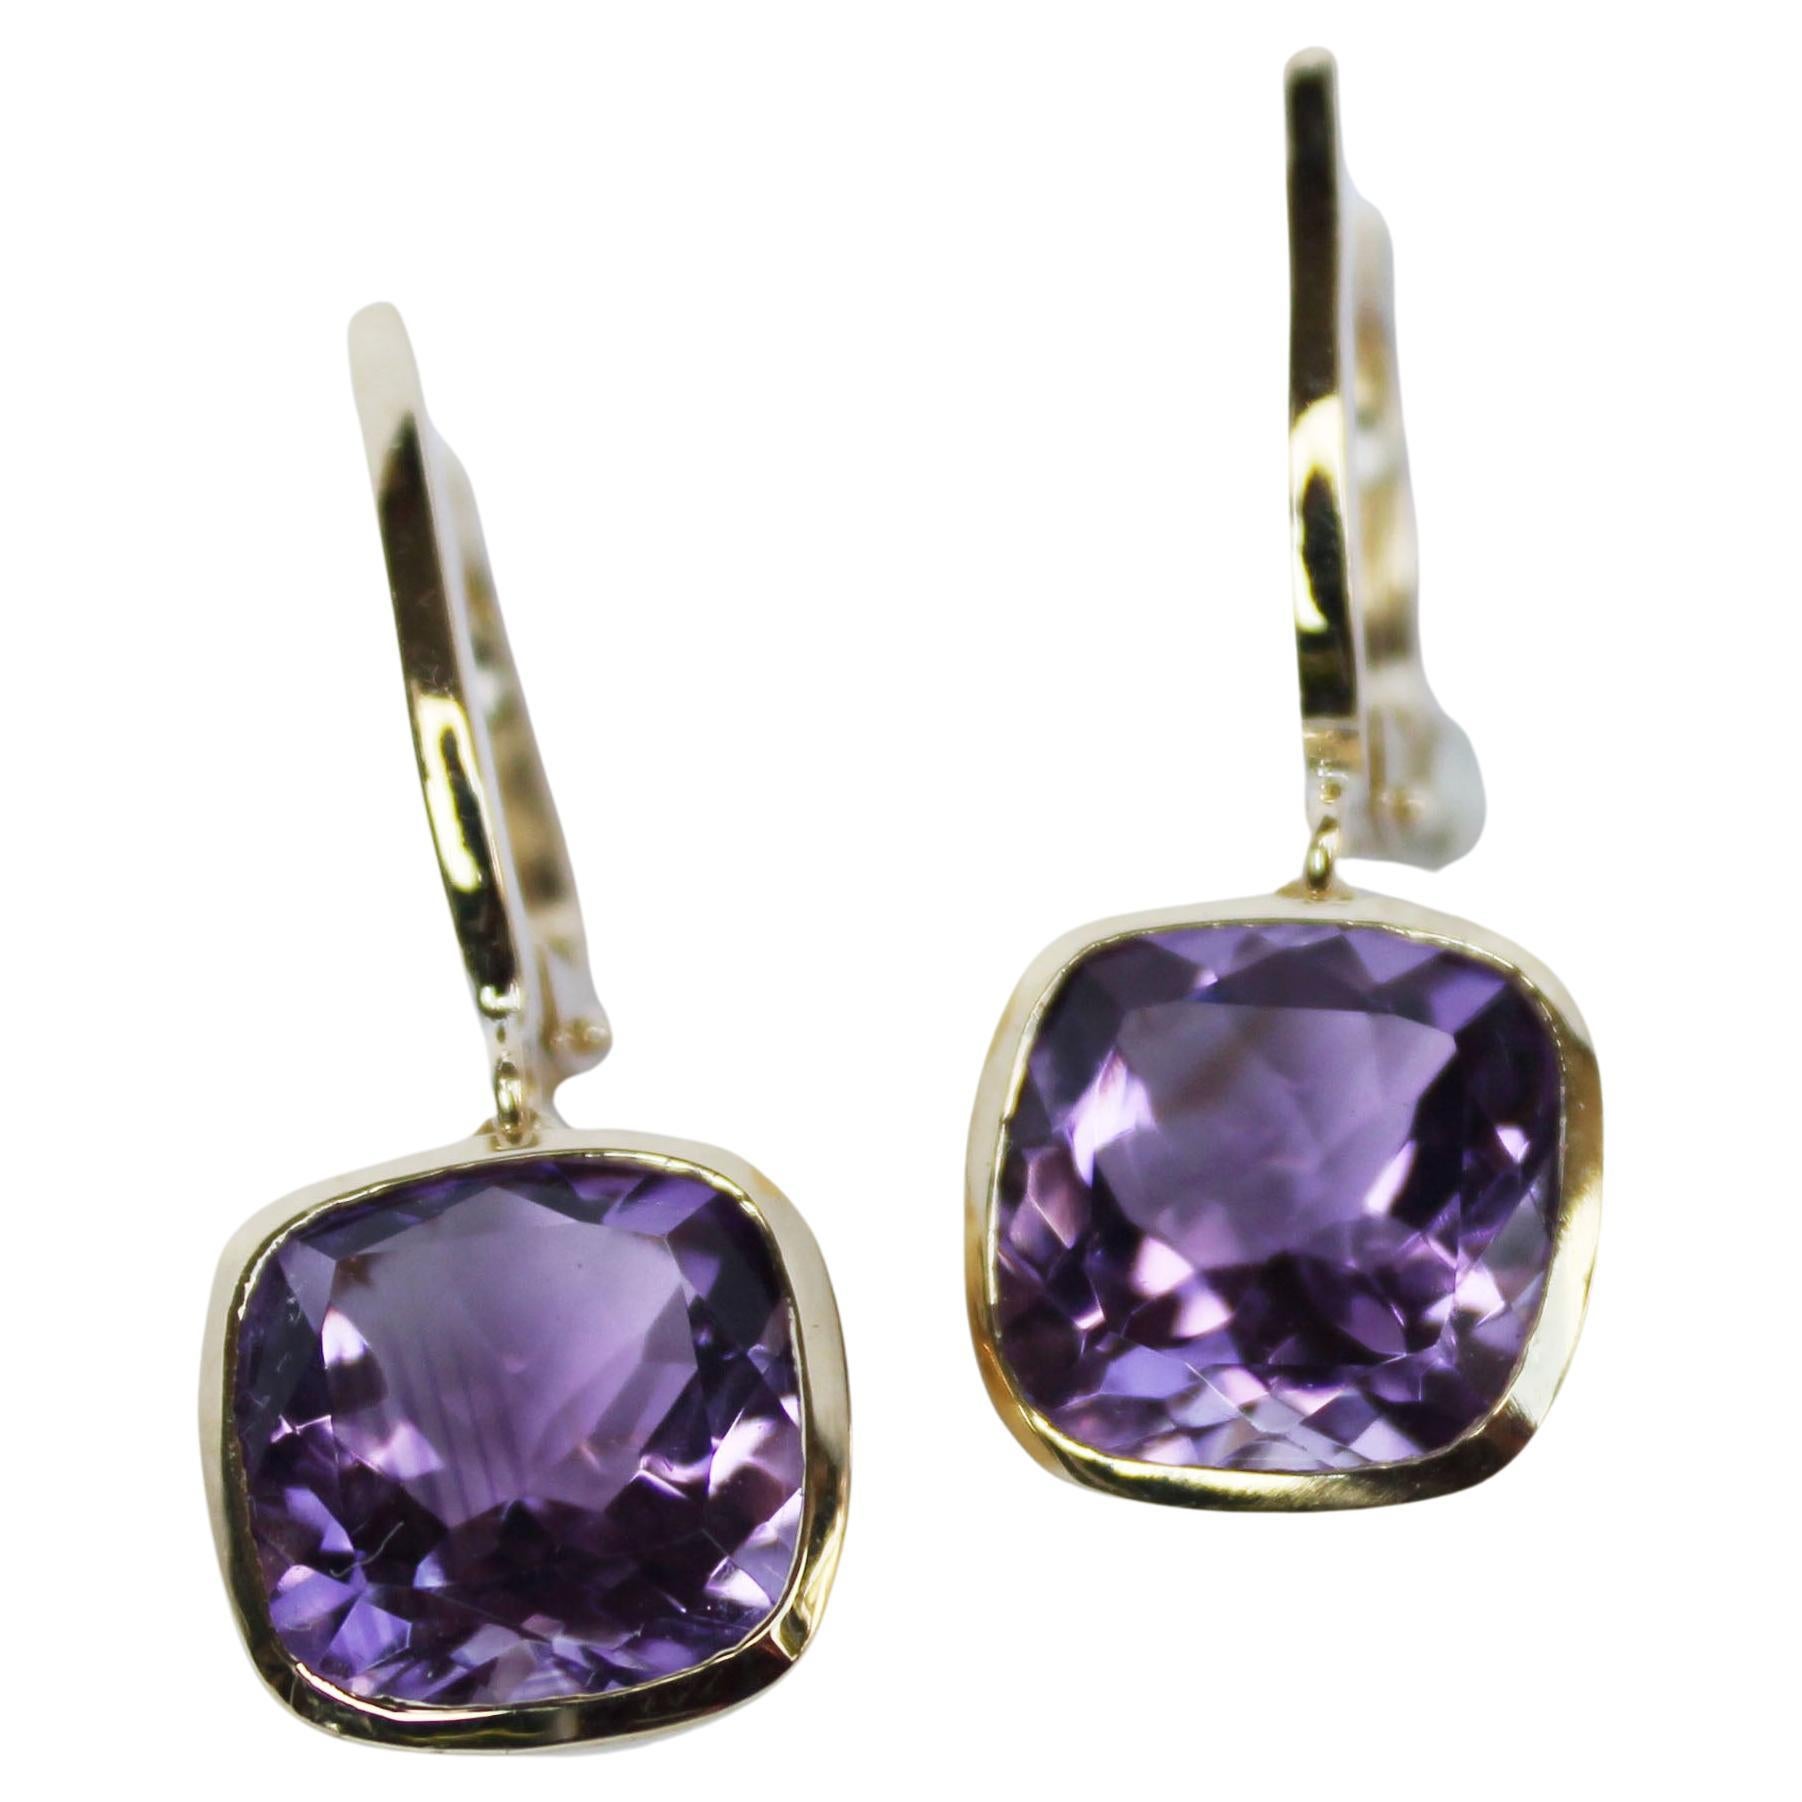 Earrings in yellow gold 18 Karat with Amethyst (square cut, size: 10x10mm)

All Stanoppi Jewelry is new and has never been previously owned or worn. Each item will arrive at your door beautifully gift wrapped in Stanoppi boxes, put inside an elegant